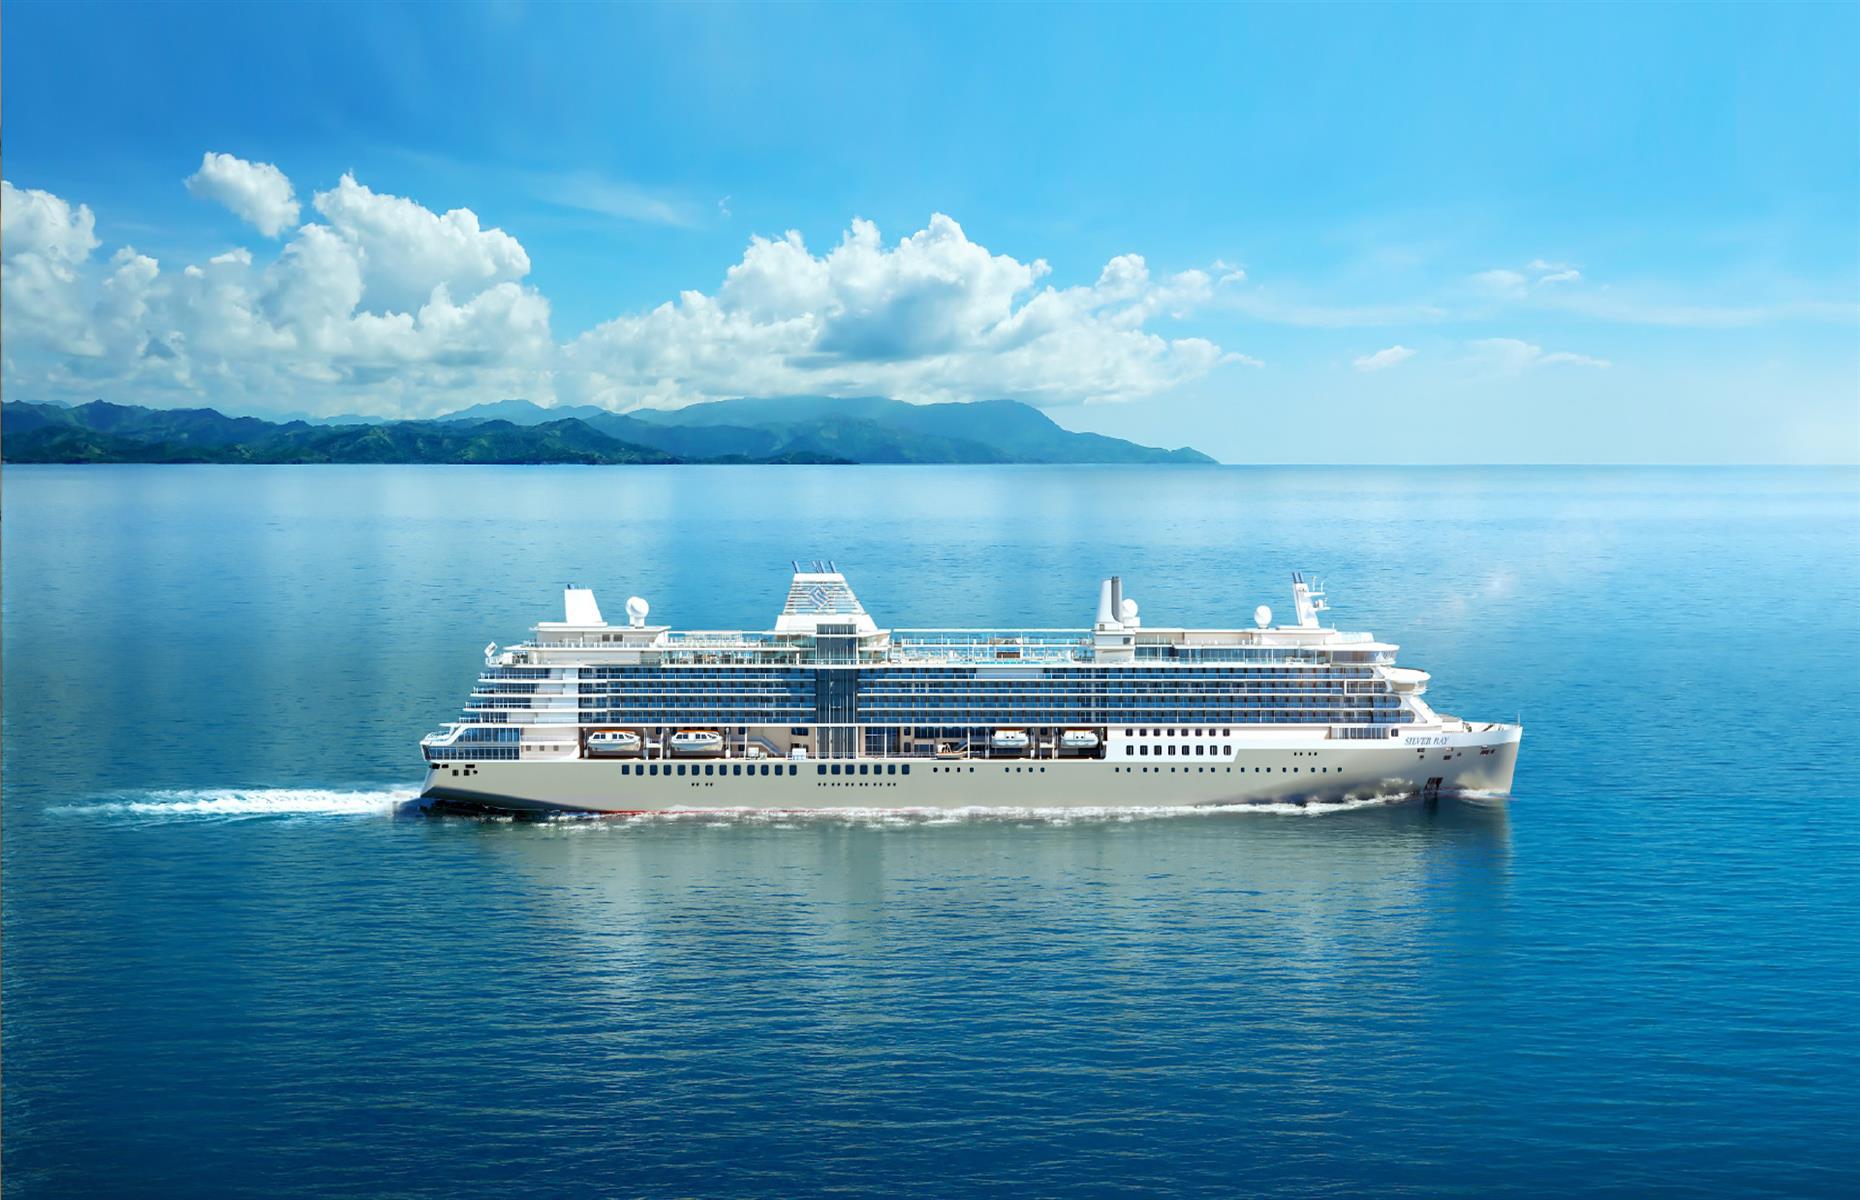 <p>Silver Ray will be a sister ship to (and a mirror image of) Silver Nova. Silver Ray will be similarly spacious, with one of the highest space-to-guest ratios of any ship in Silversea's fleet. She'll have a maximum capacity of 728 passengers, and with 544 crew passengers, you can expect to be waited on hand and foot – thanks in part to the cruise line's legendary butler service. The eight restaurants will include several which have become Silversea staples, including S.A.L.T for regional cuisine.</p>